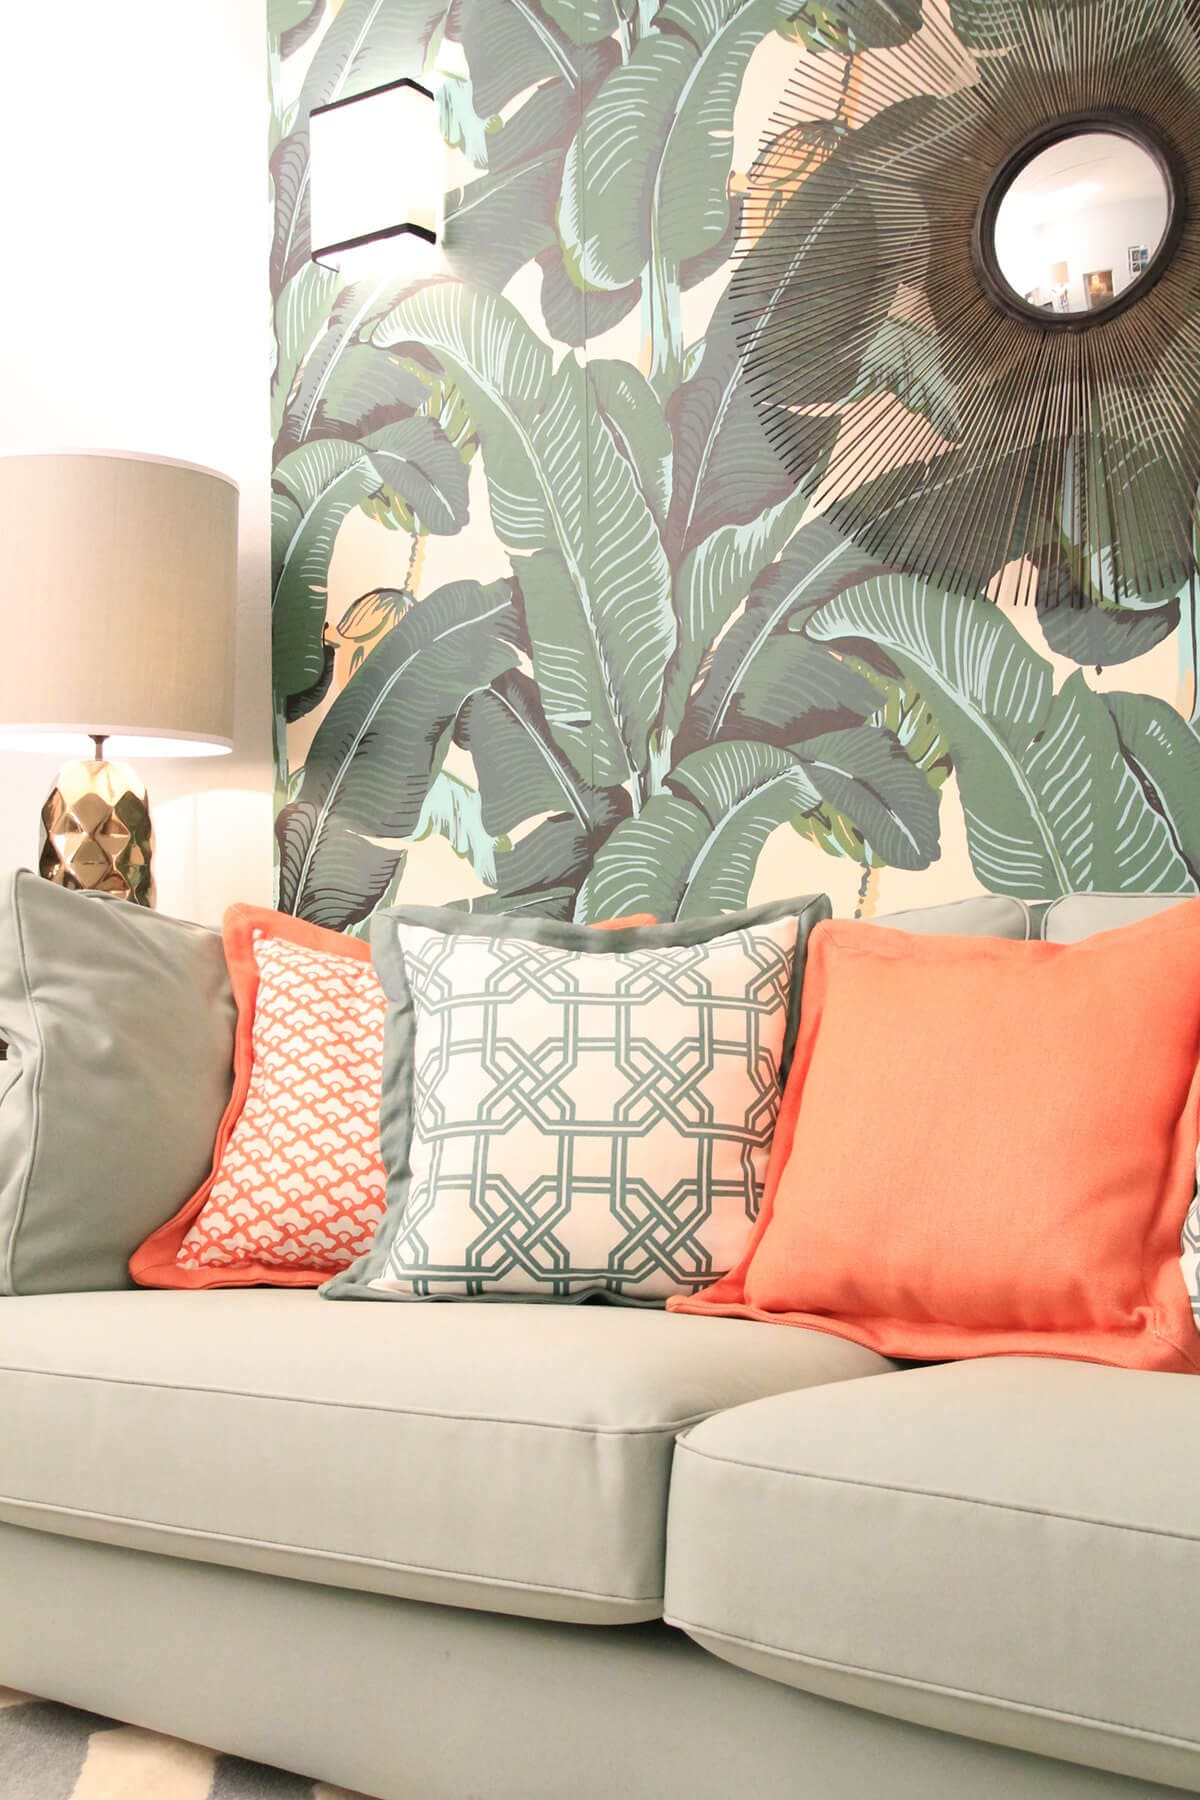 Stunning tropical style decorating ideas for this summer - 85